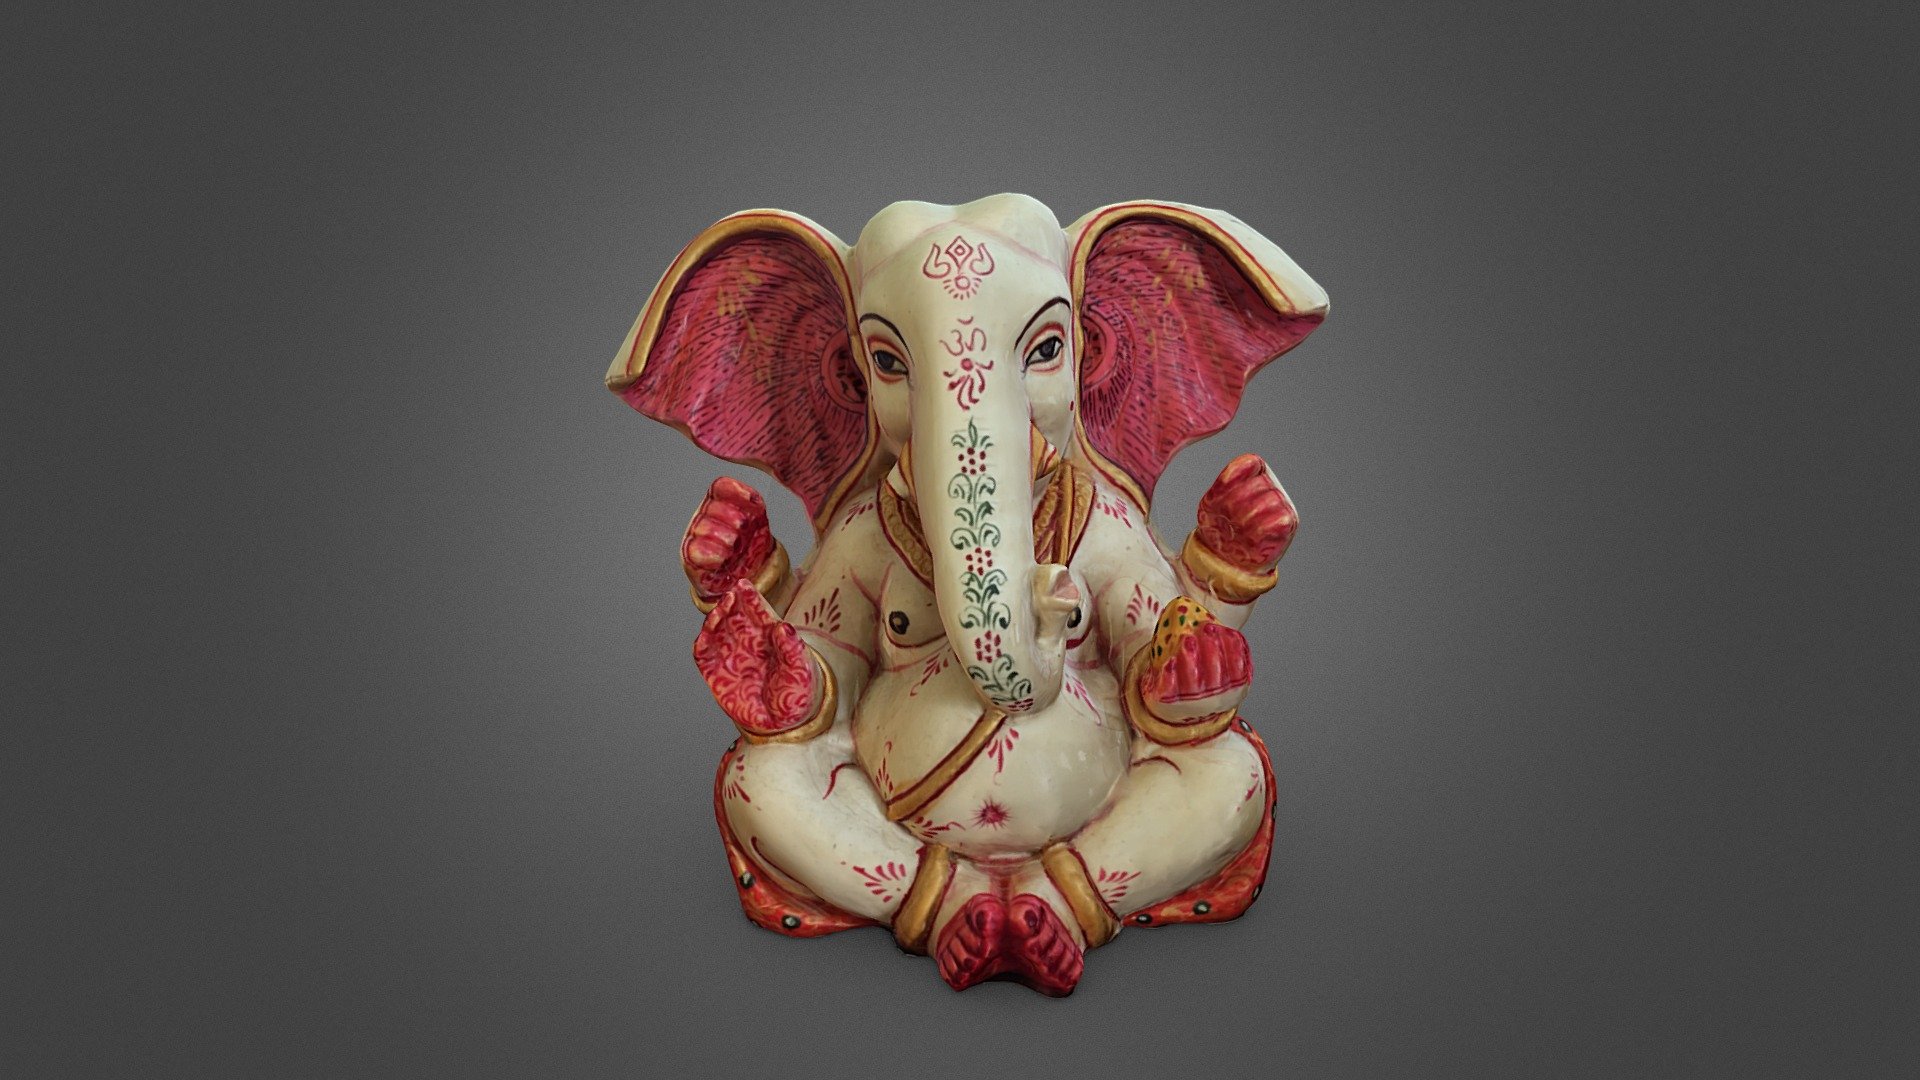 Ganesha made of camel bone purchased in Kochi, February 2014. Scanned via 123D Catch (sadly discontinued) and edited and retopologized in Blender. Includes photo, normal, and ambient occlusion maps.

&ldquo;Ganesha (Sanskrit: गणेश, IAST: Gaṇeśa;), or Ganesh, also known as Ganapati and Vinayaka, is one of the best-known and most worshipped deities in the Hindu pantheon&hellip; Although Ganesha is known by many attributes, he is readily identified by his elephant head. He is widely revered, more specifically, as the remover of obstacles; the patron of arts and sciences; and the deva of intellect and wisdom. As the god of beginnings, he is honoured at the start of rites and ceremonies. Ganesha is also invoked as patron of letters and learning during writing sessions. Several texts relate mythological anecdotes associated with his birth and exploits.